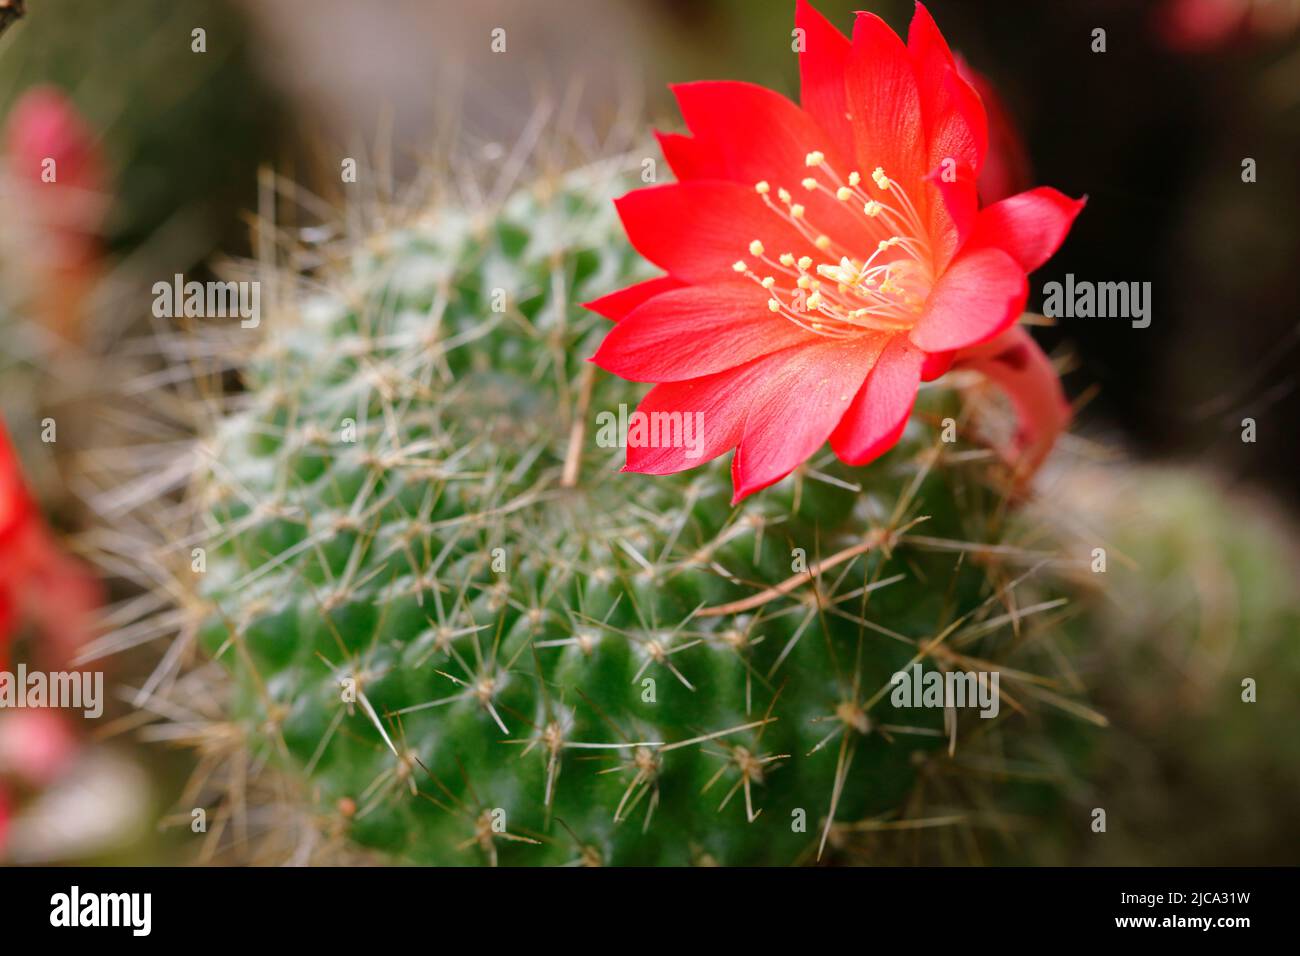 A red cactus flower Stock Photo